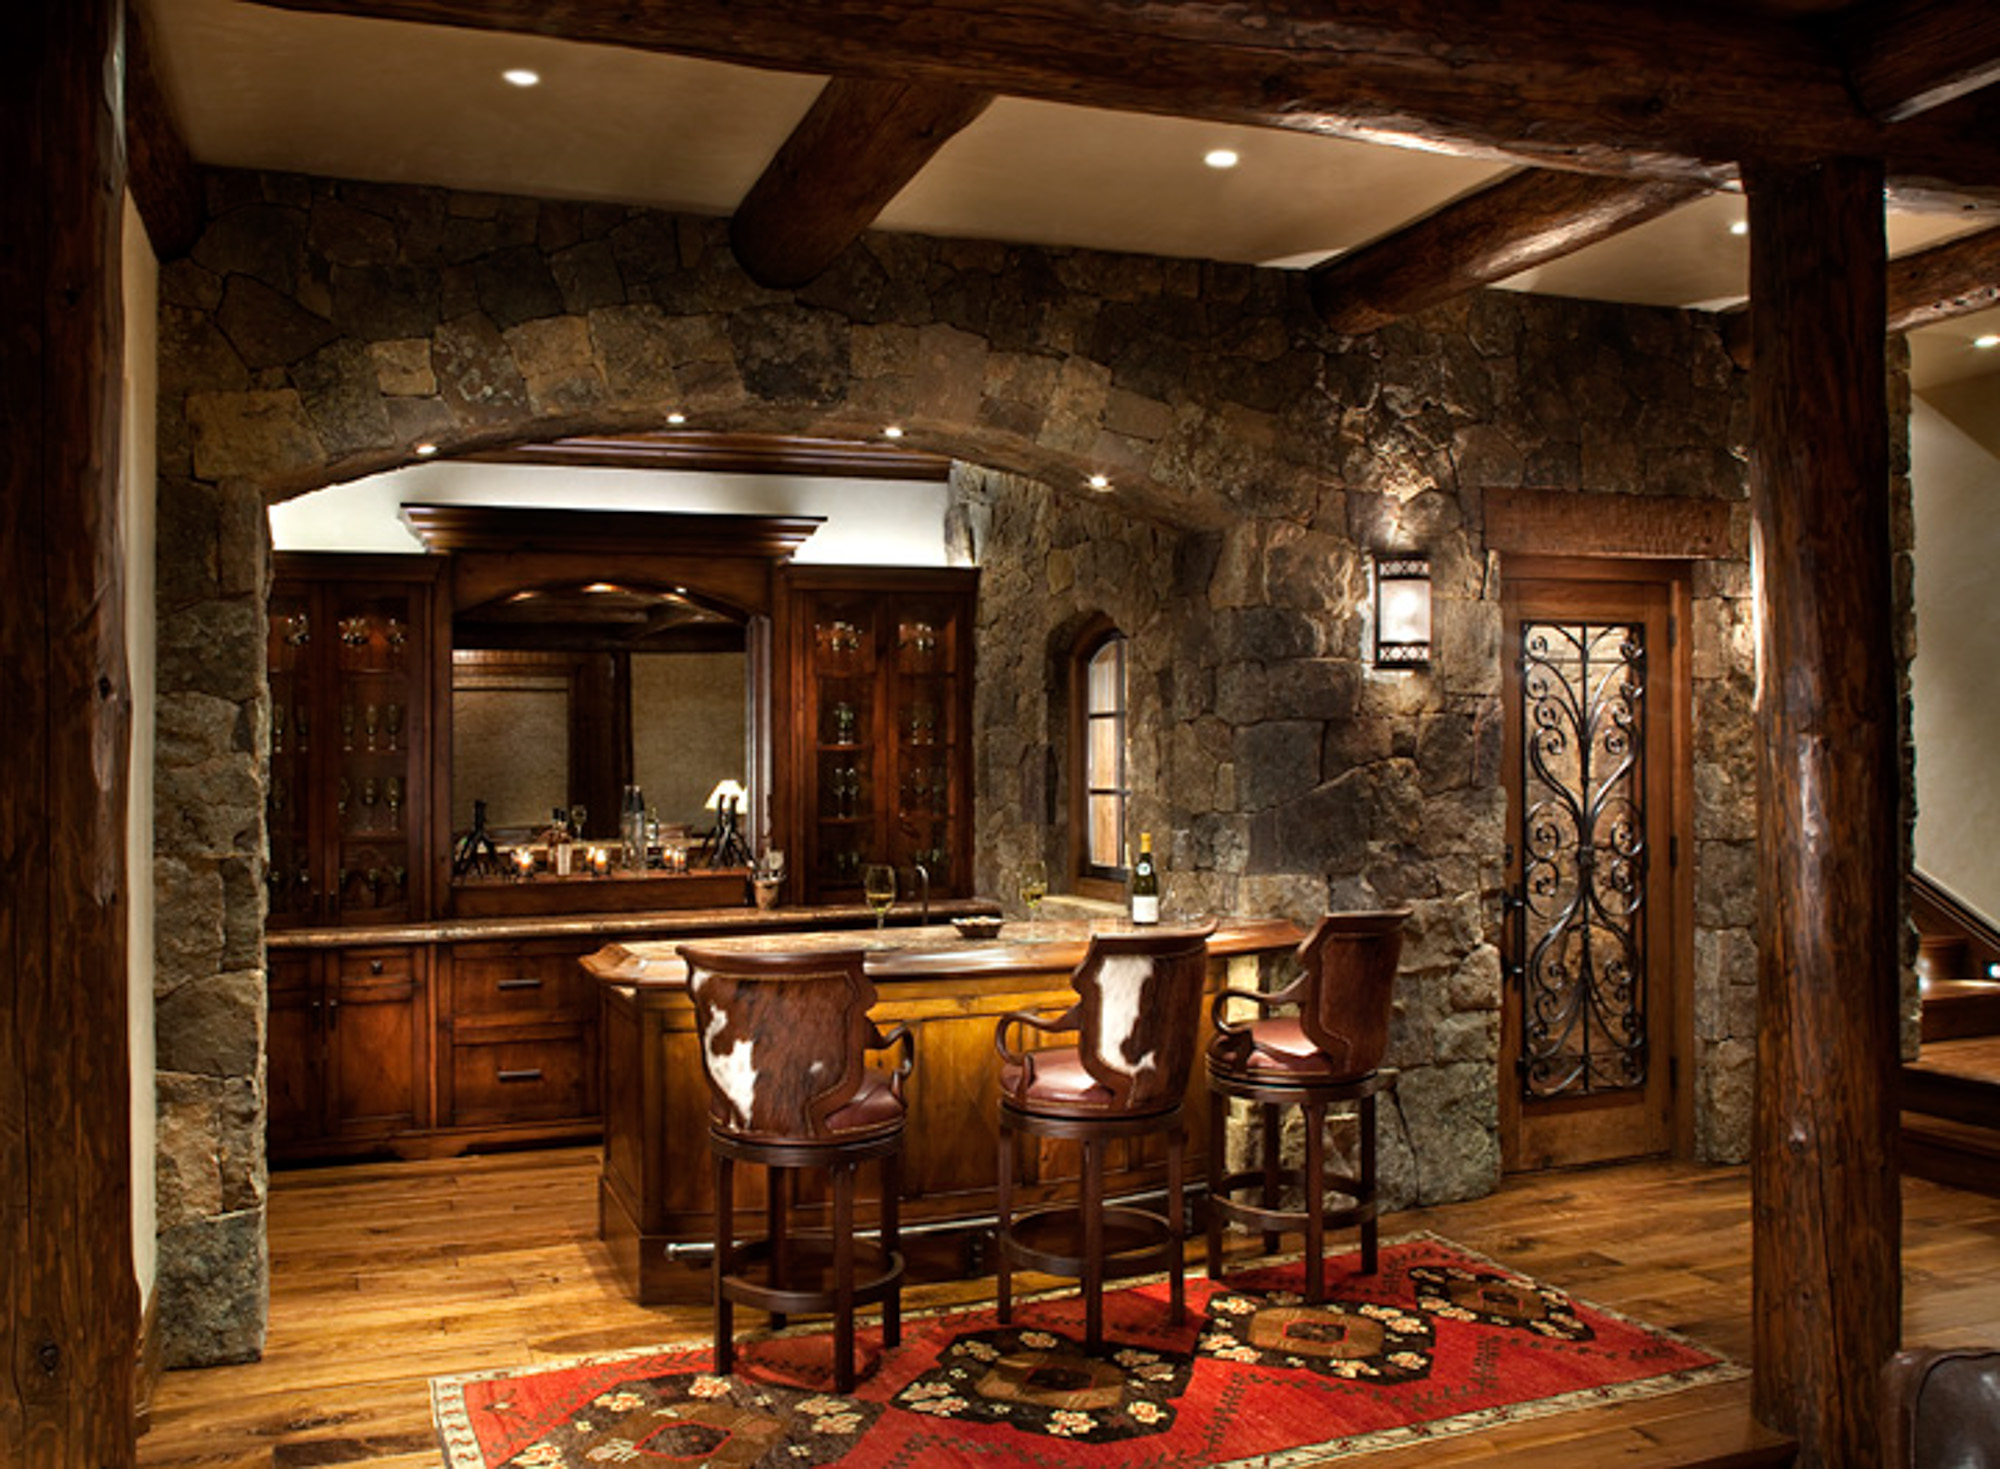 A view of an old-fashioned wooden bar with stone surround in bachelor gulch